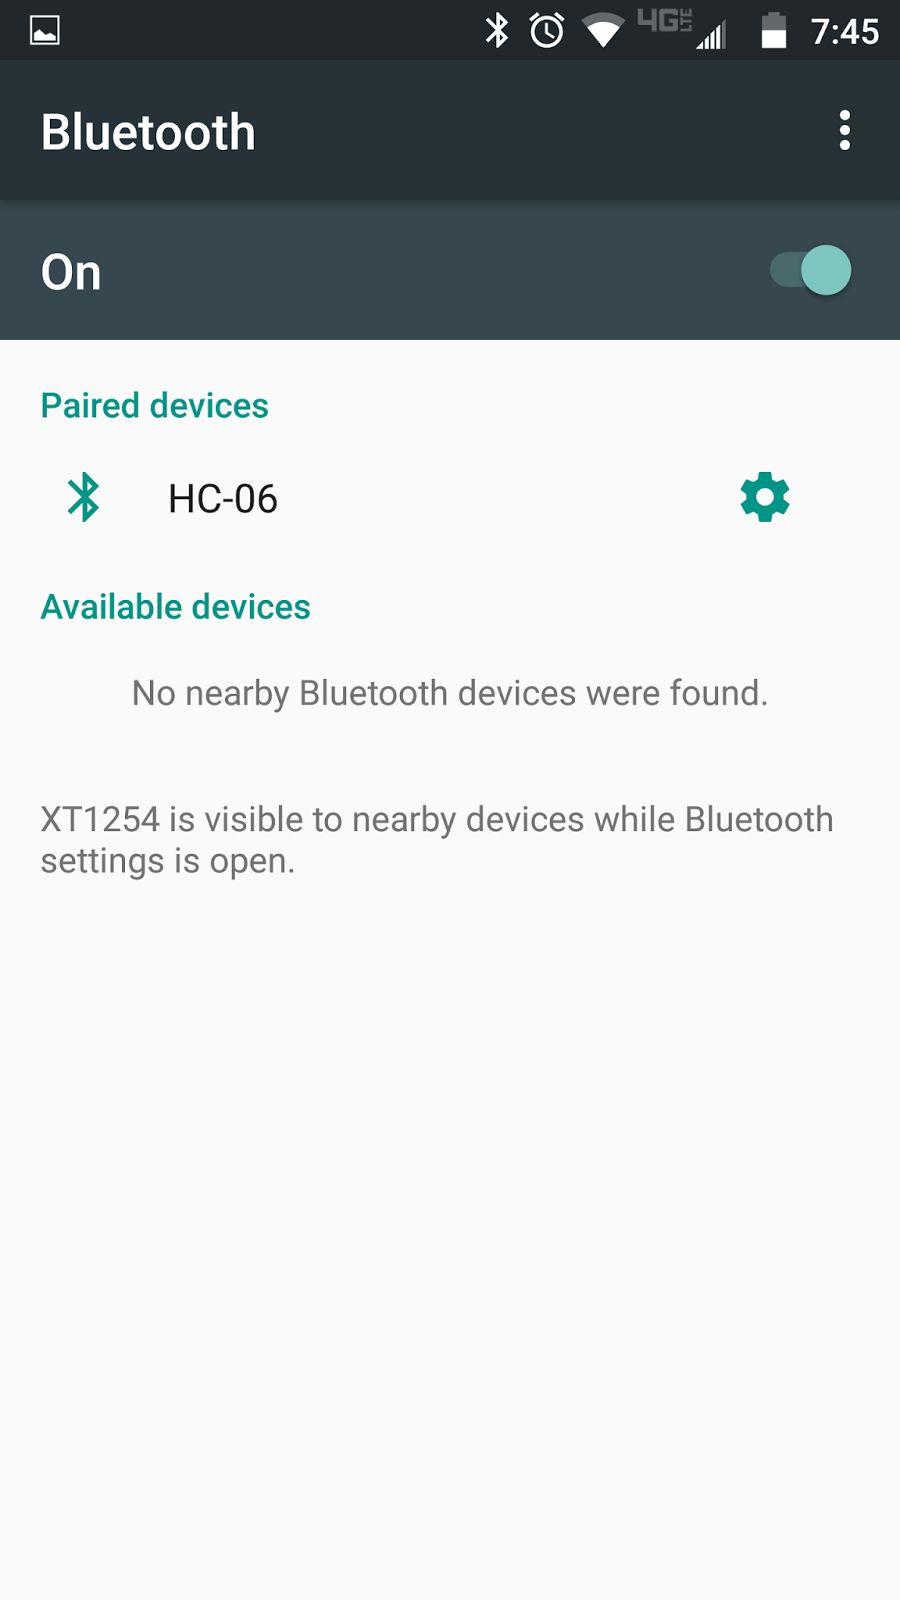 In the bluetooth settings go ahead and pair with the discovered HC-06 device.